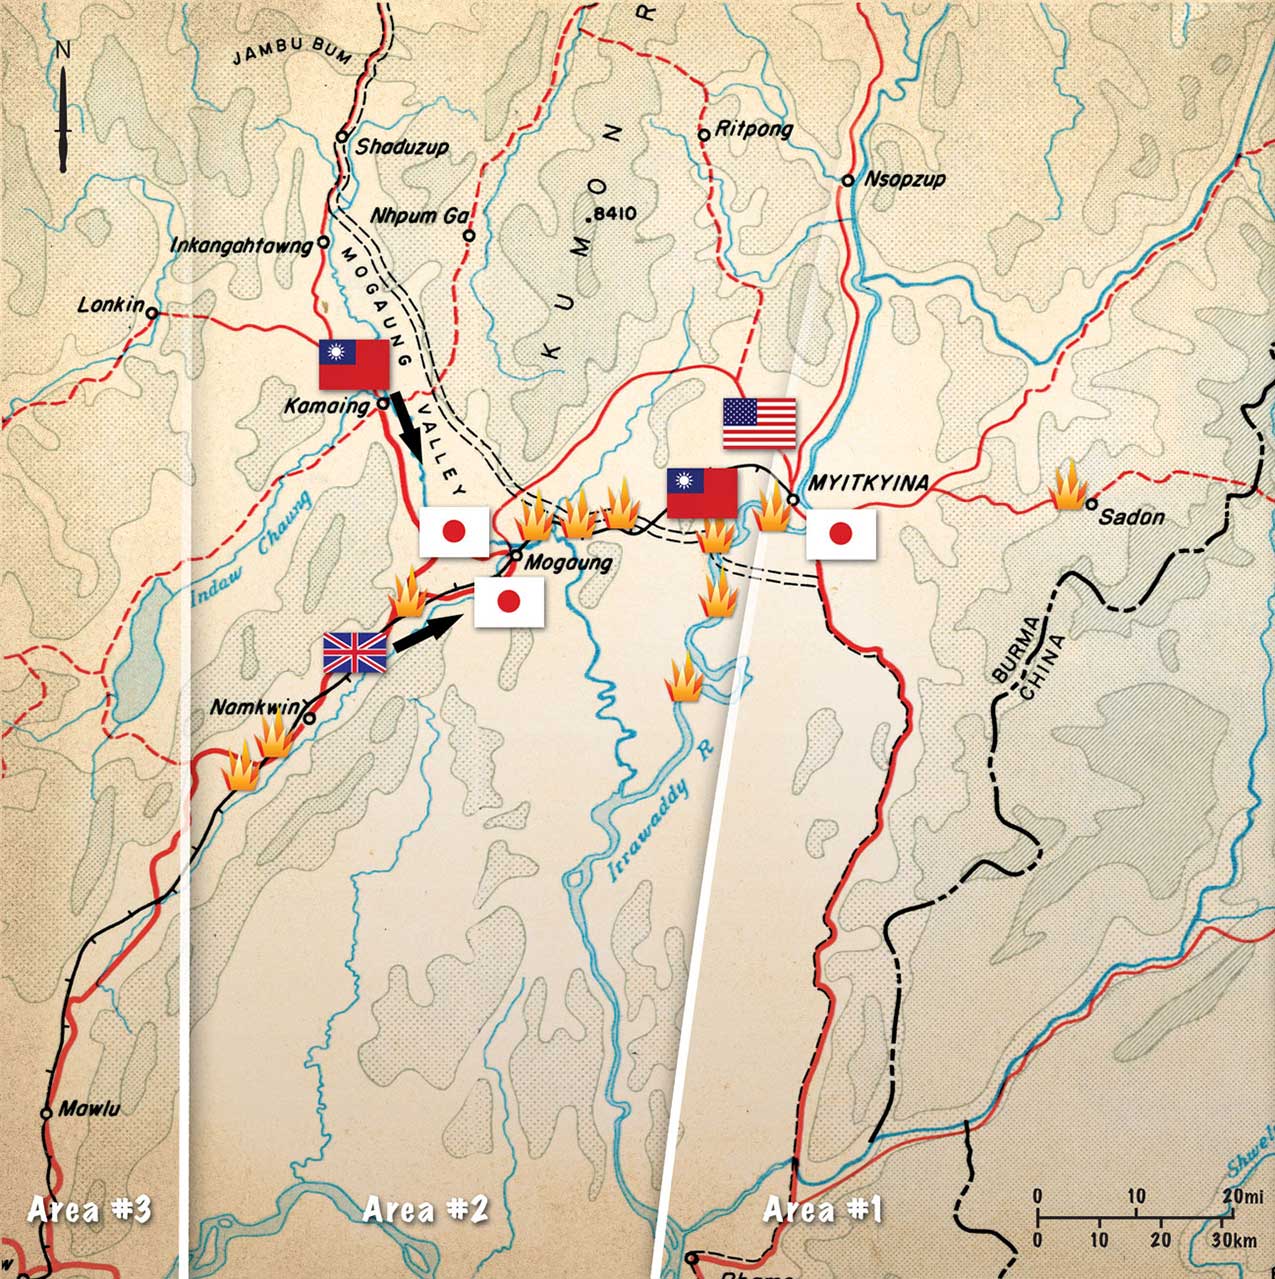 MAP: OSS Detachment 101 in the Myitkyina Campaign, June-August 1944